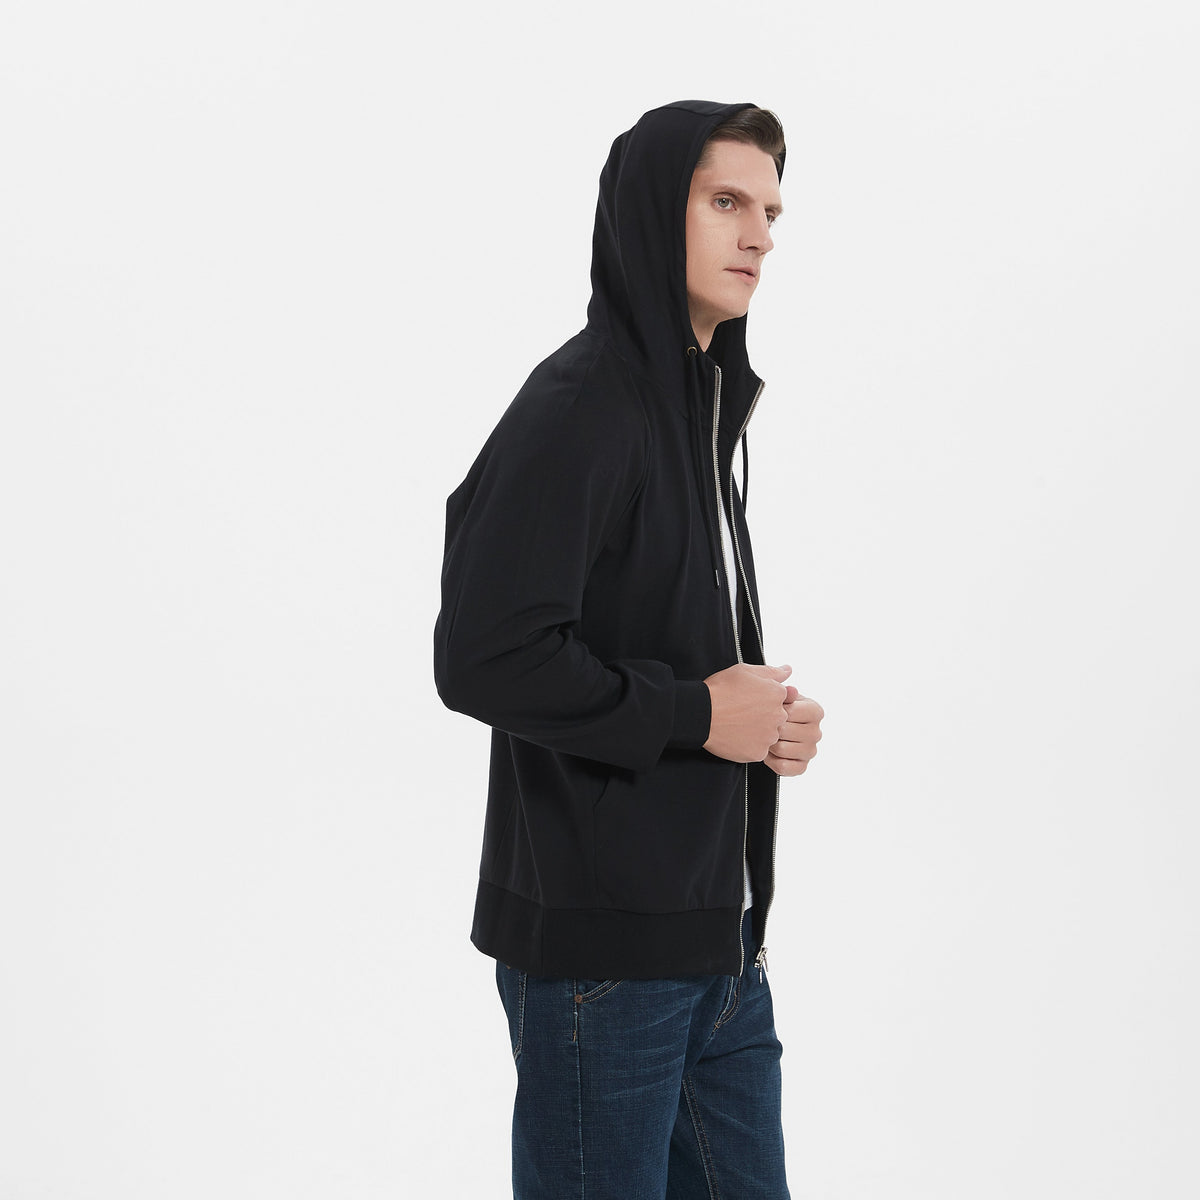 Sideview of EMF Shielidng Zip-up hoodie. A Male strong and tall model is wearing it.